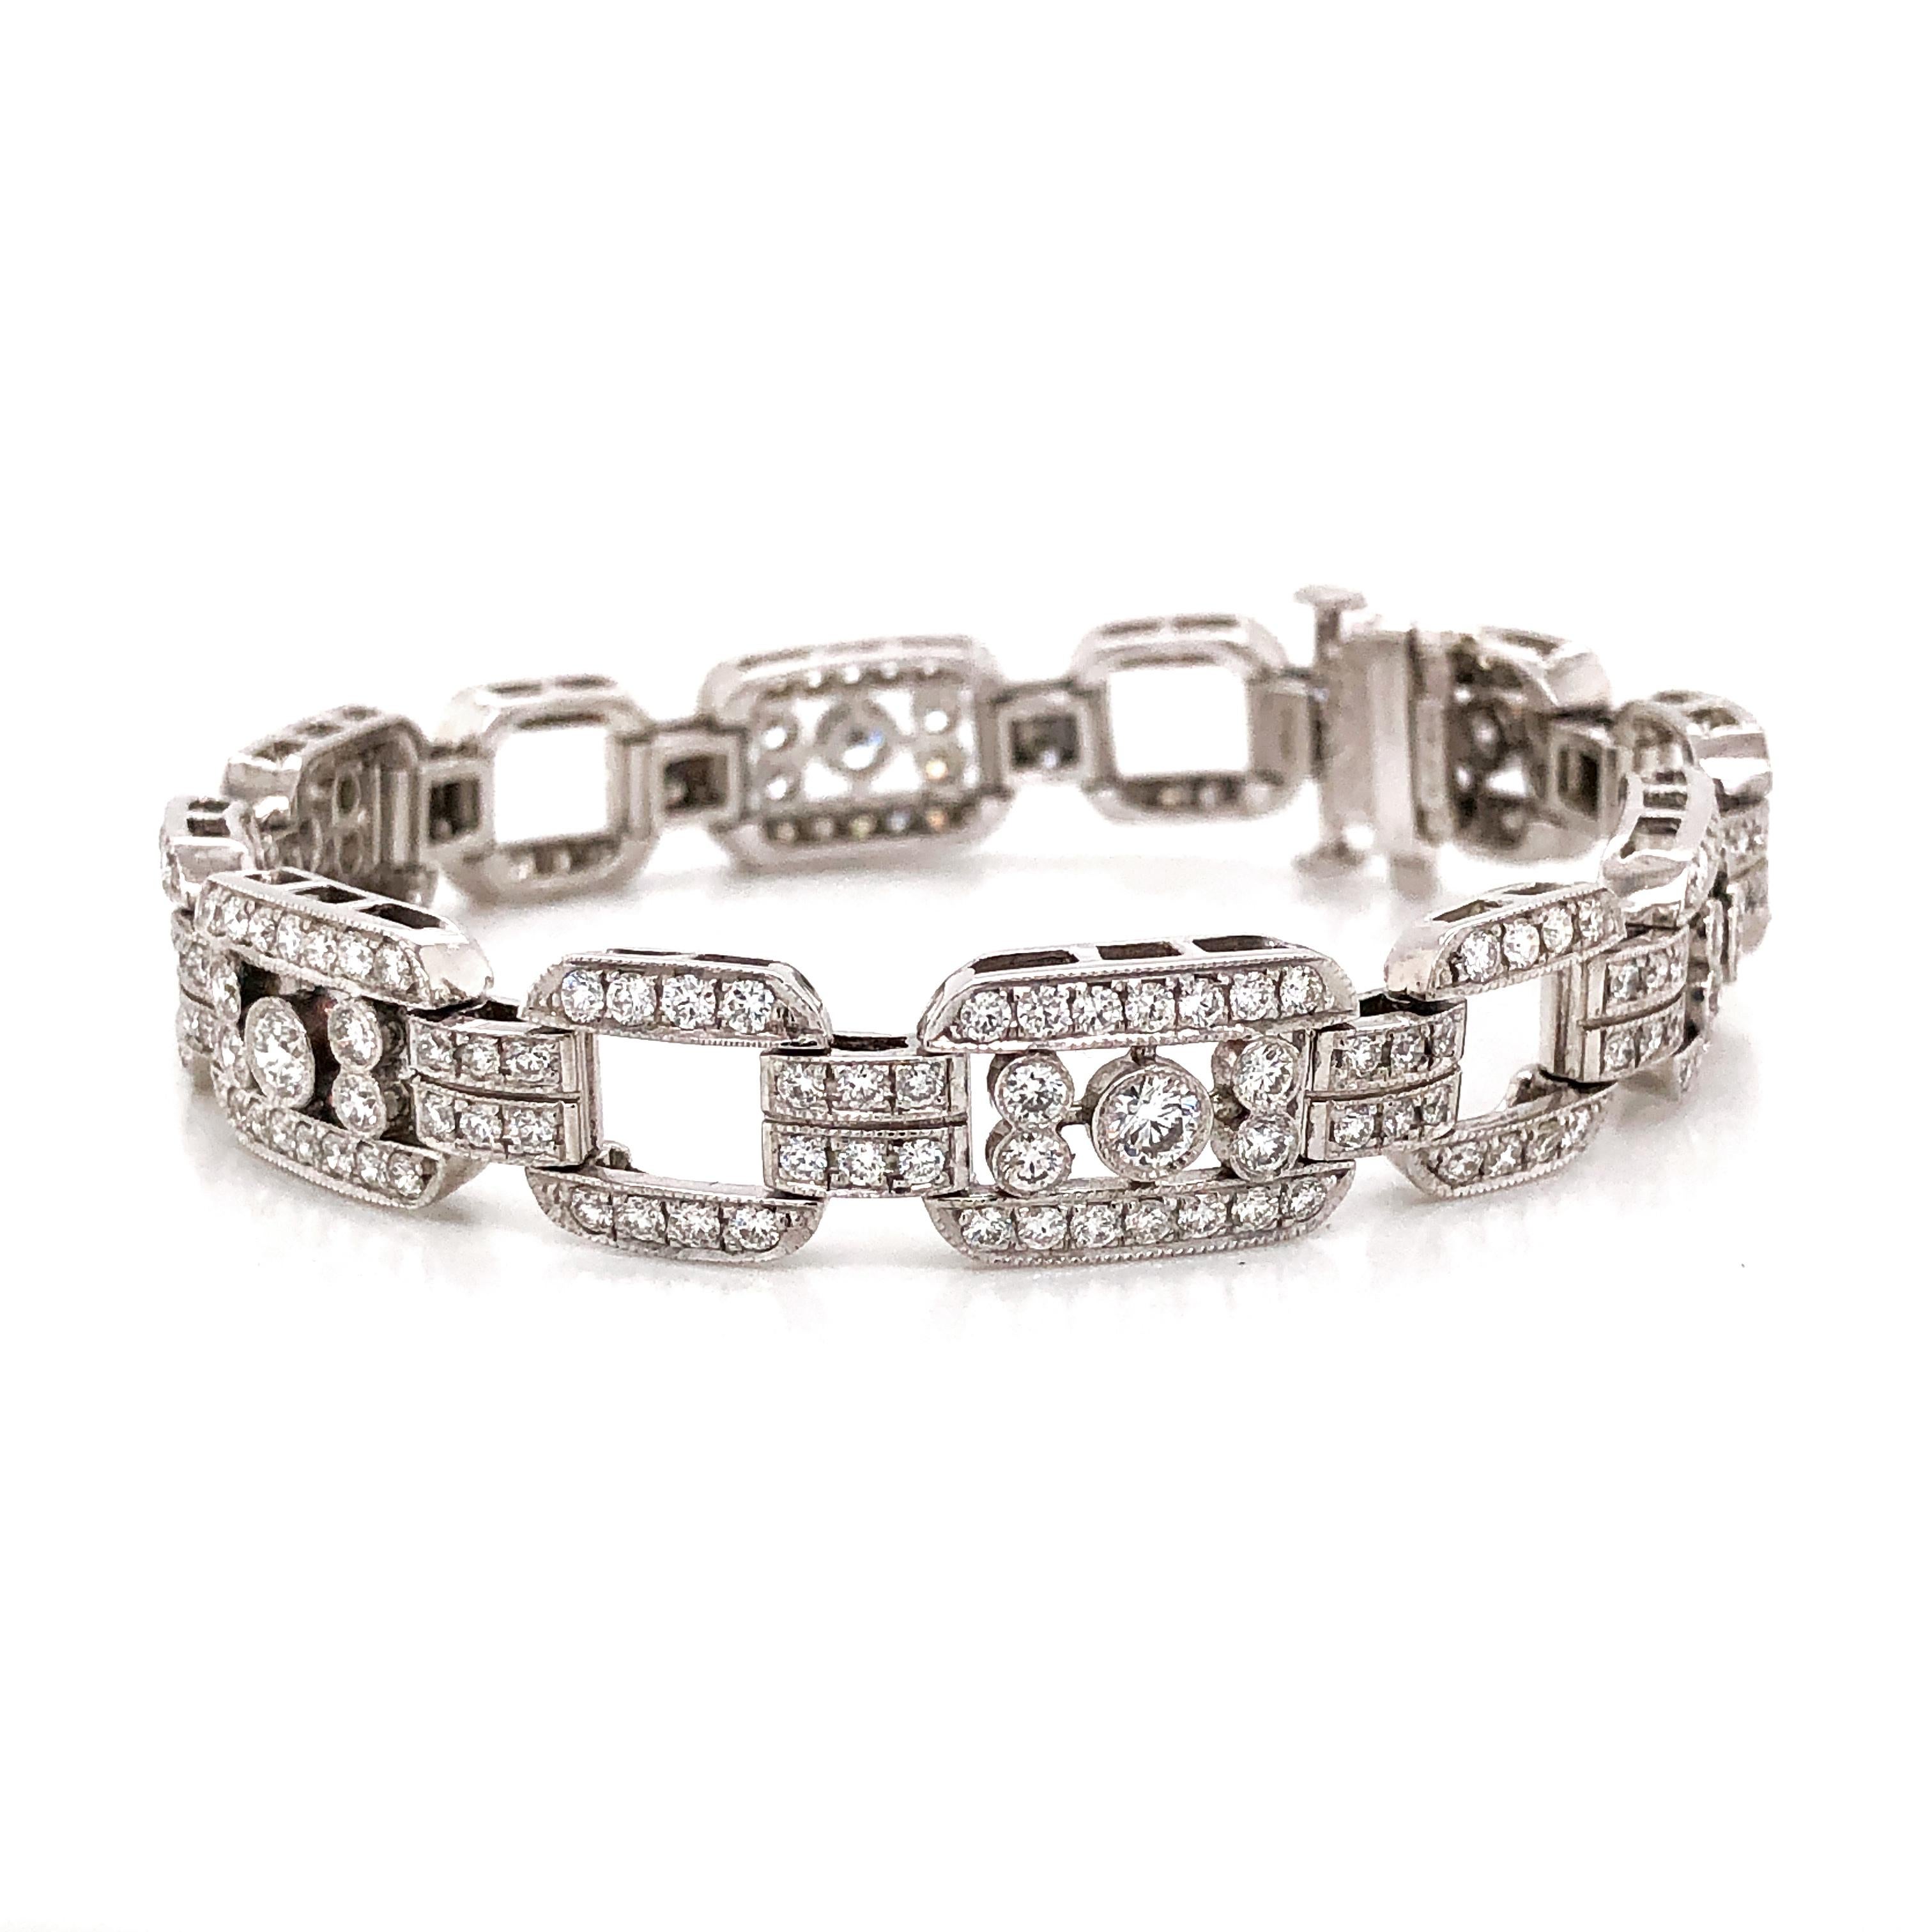 Art Deco Inspired Round Cut Diamonds 7.85 Carat Platinum Bracelet In New Condition For Sale In New York, NY